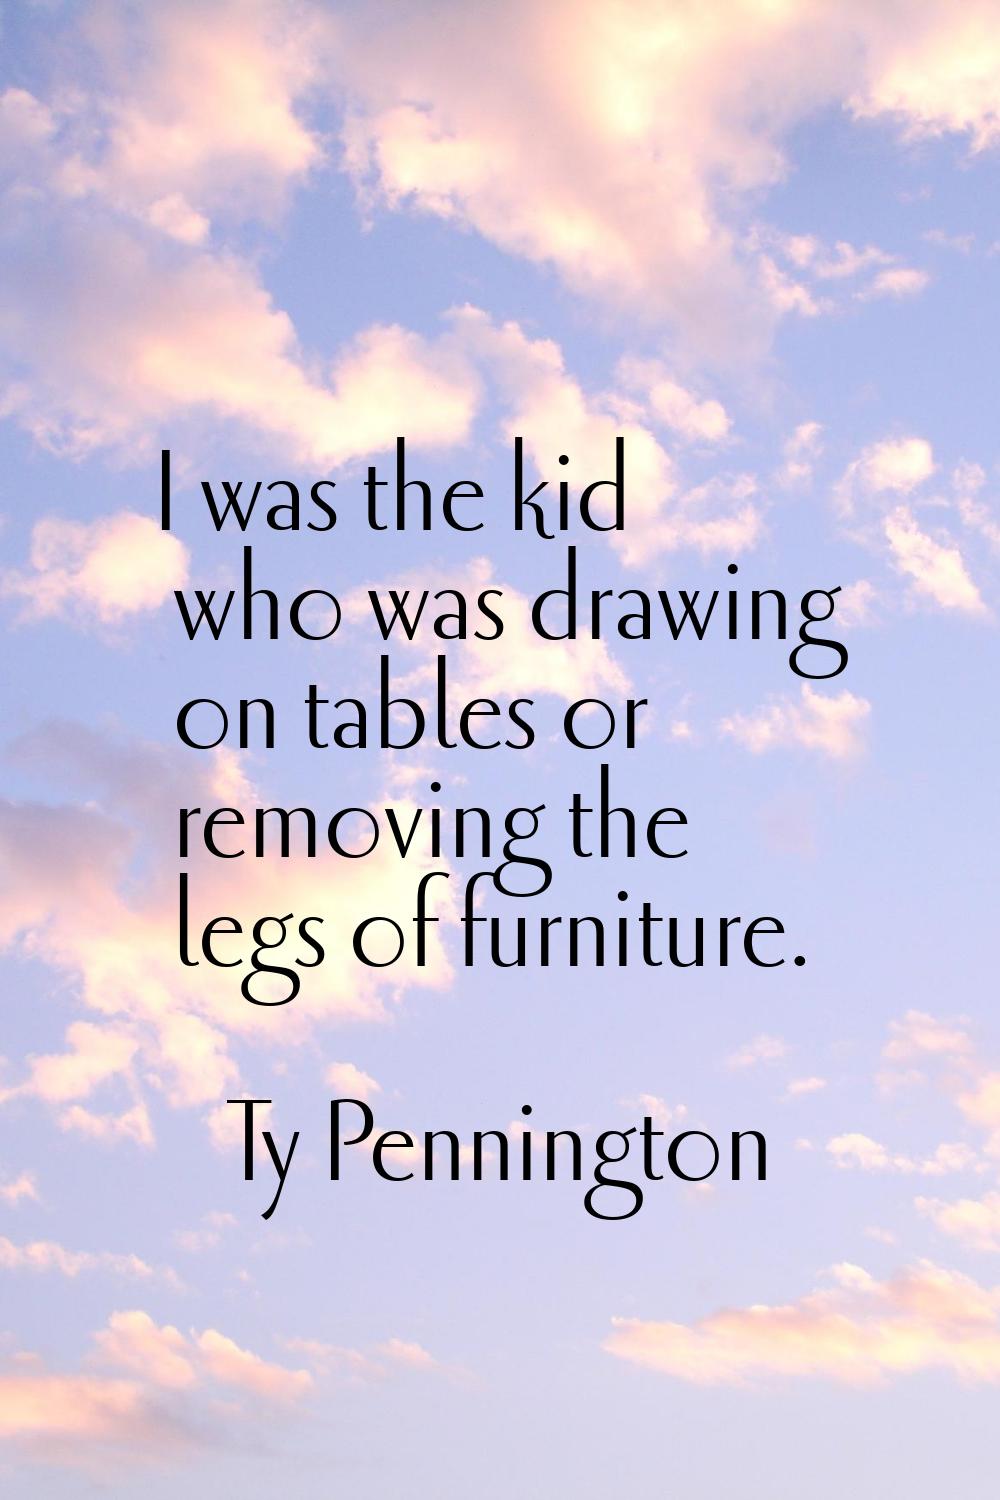 I was the kid who was drawing on tables or removing the legs of furniture.